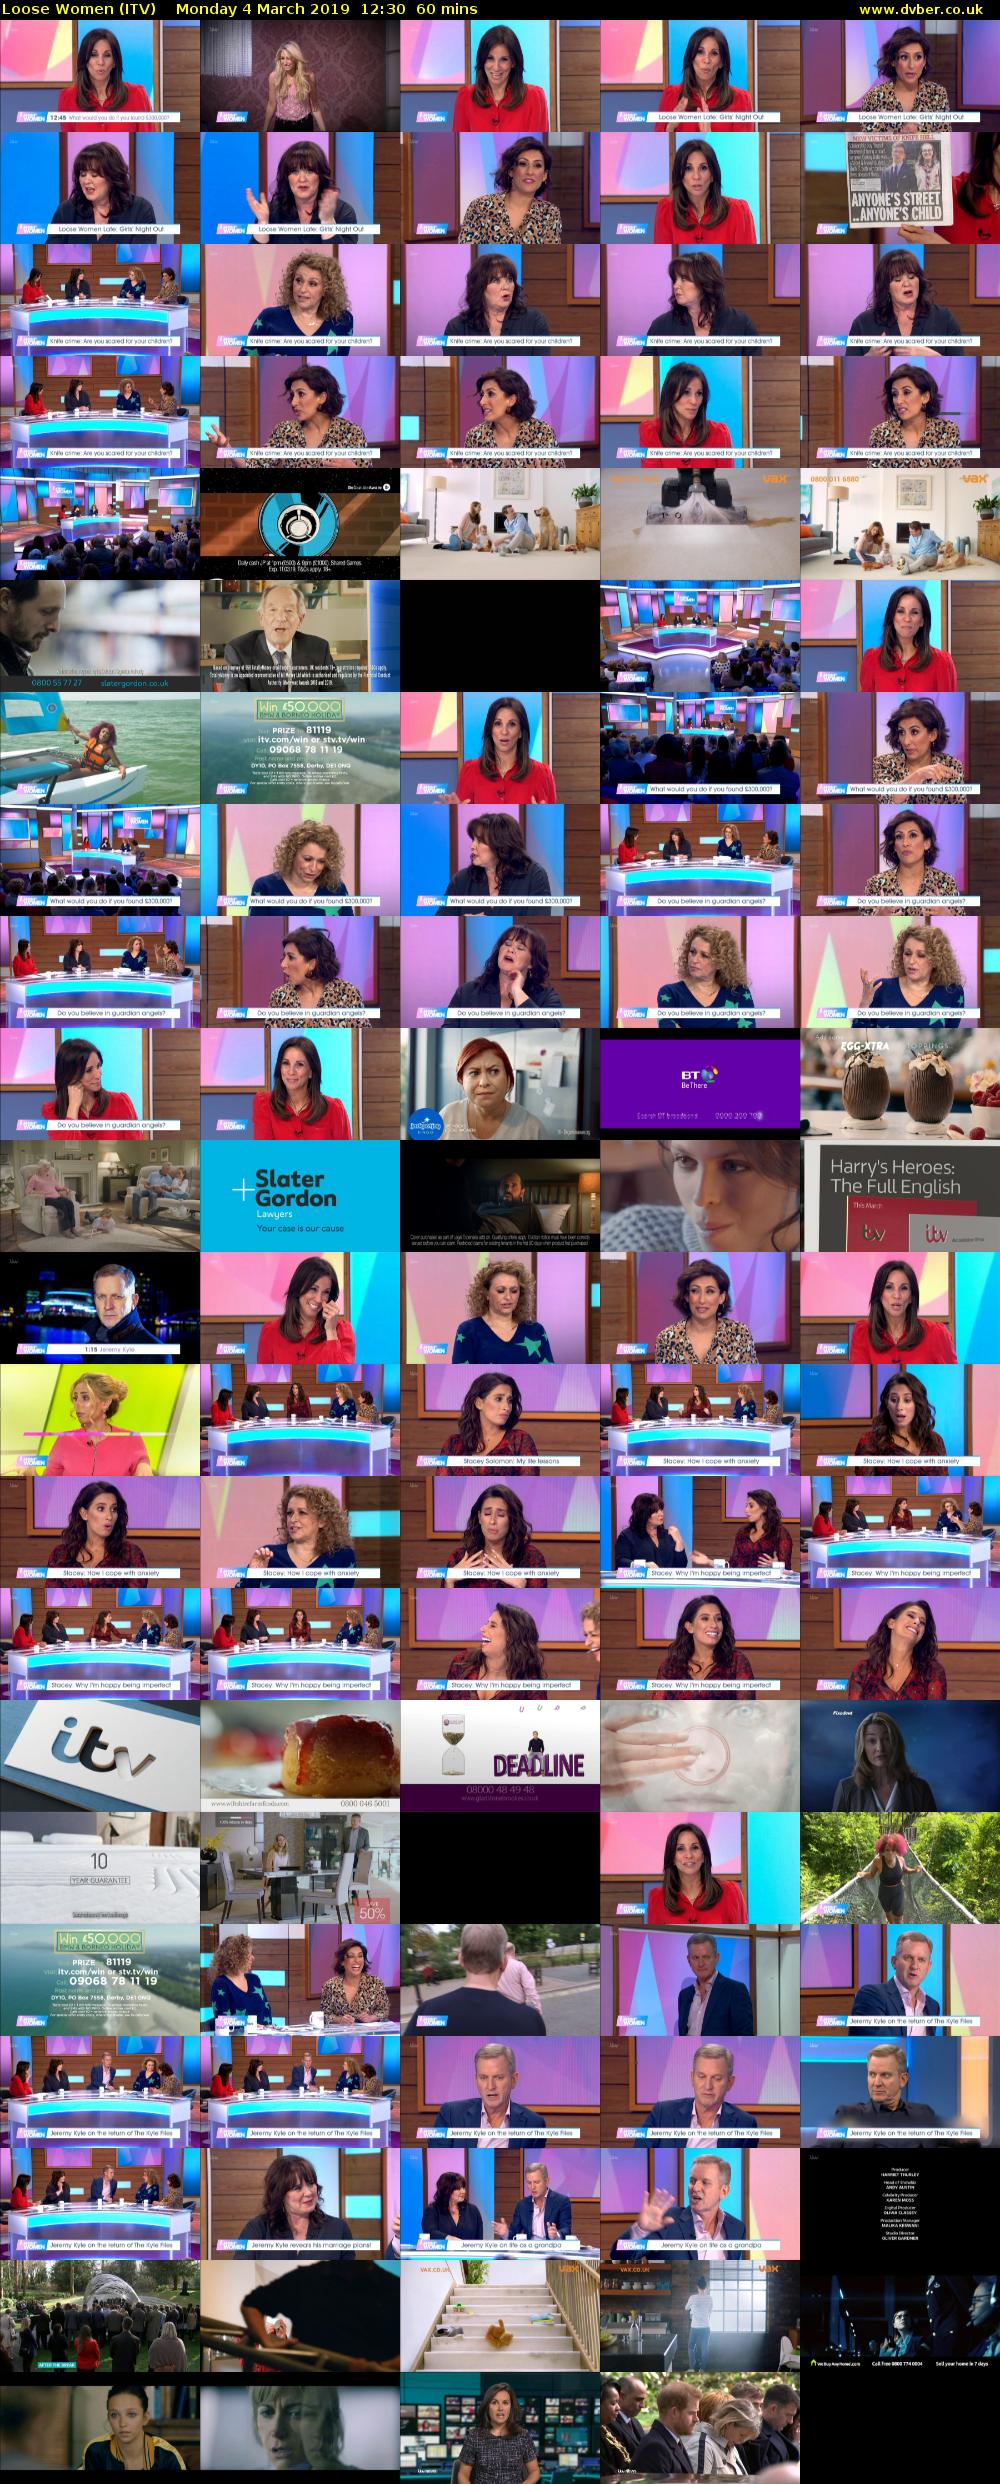 Loose Women (ITV) Monday 4 March 2019 12:30 - 13:30